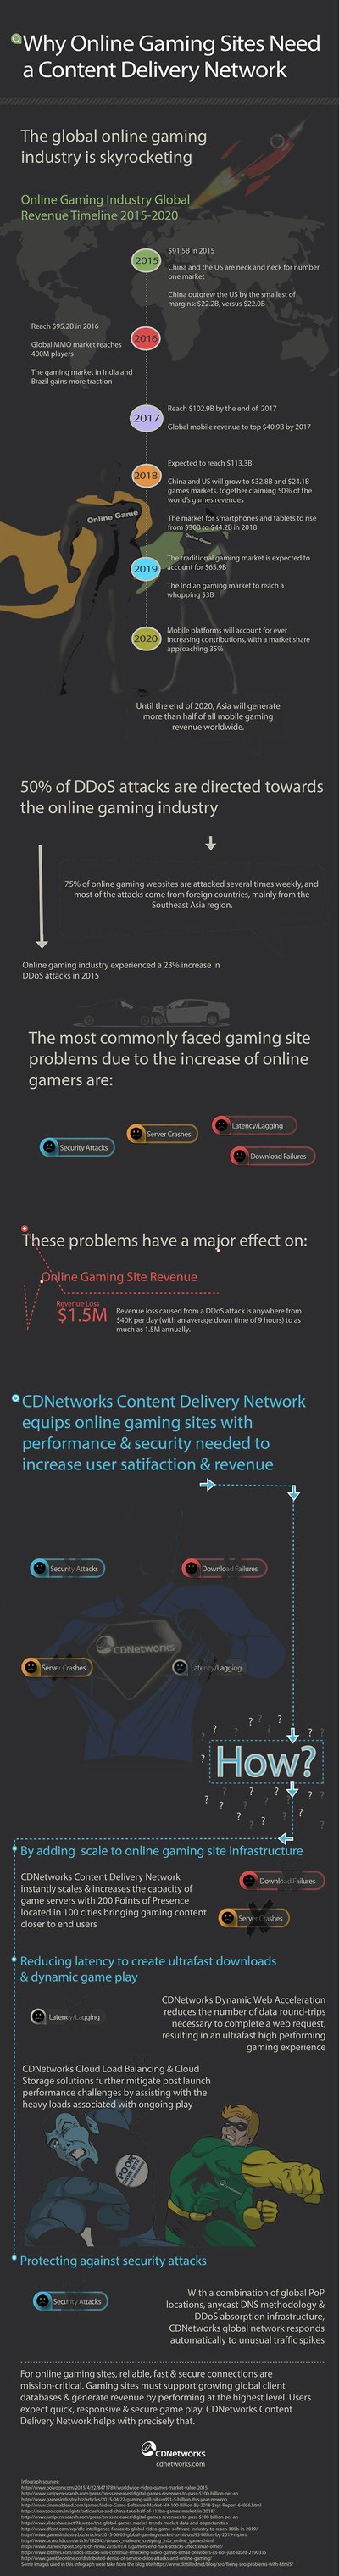 Why online game sites need a CDN